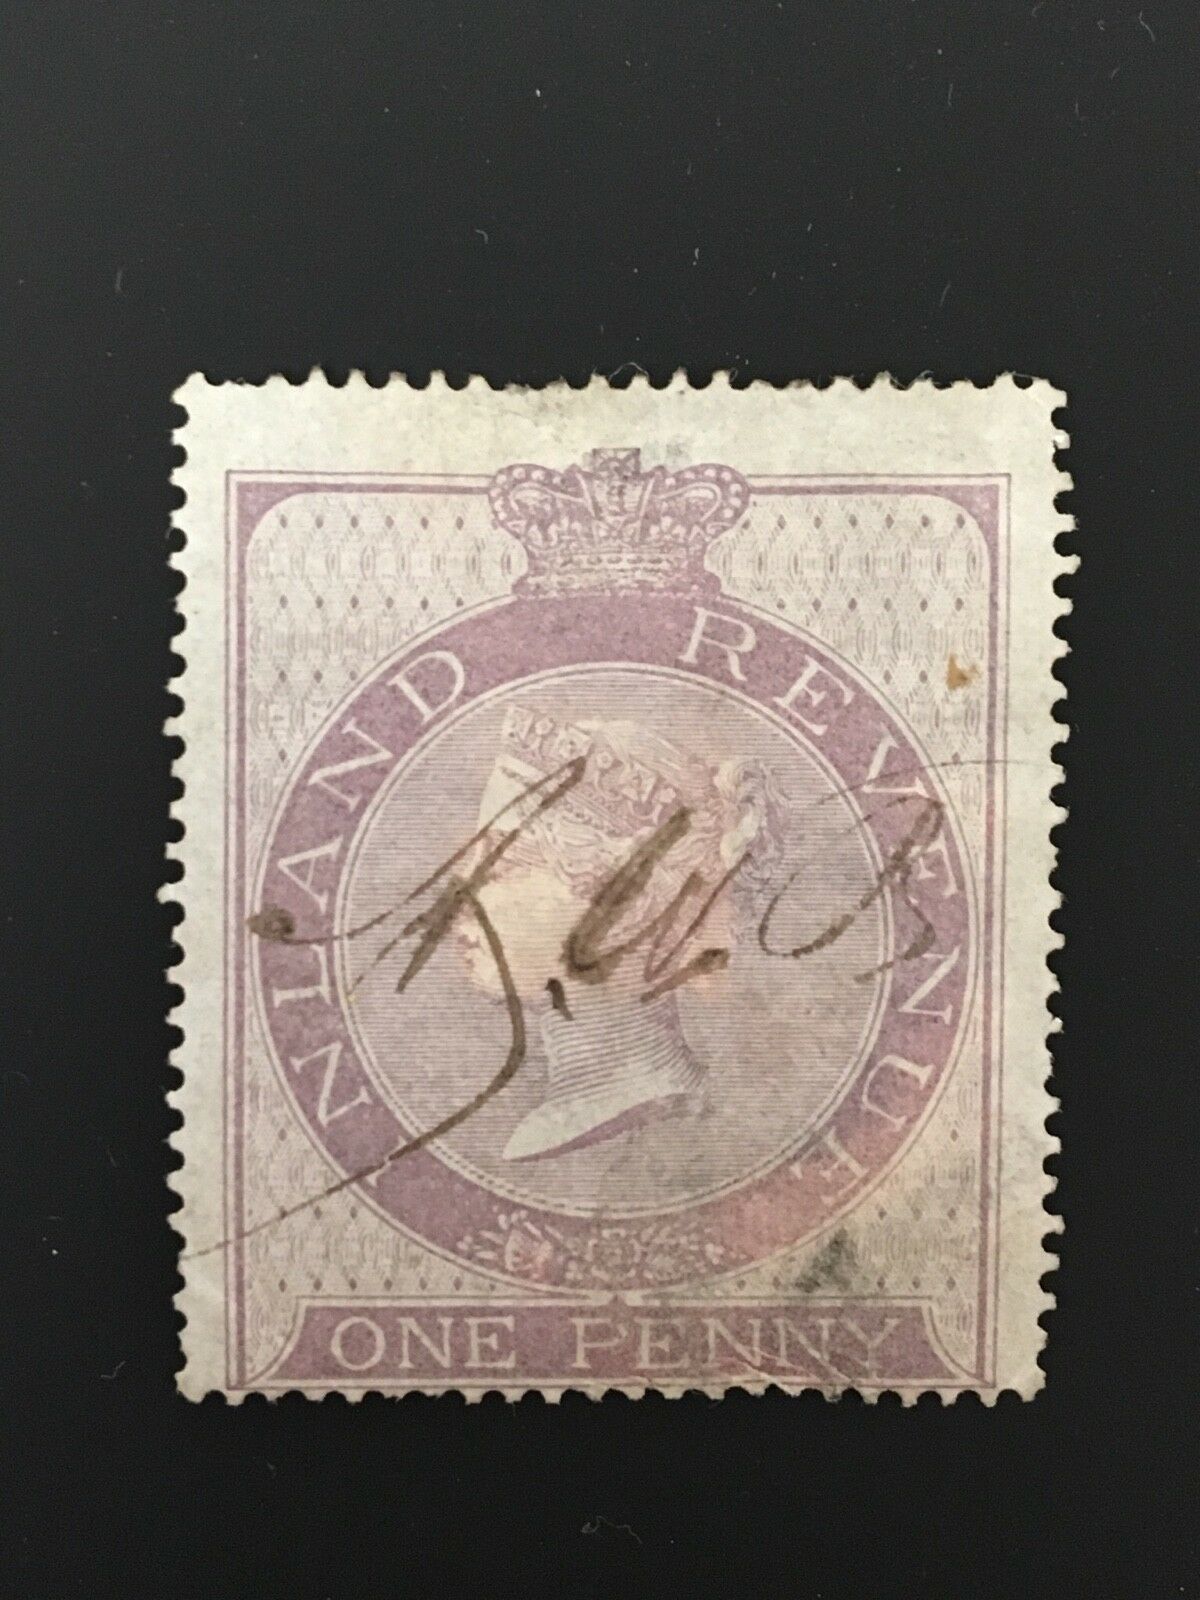 Revenue One Penny British  stamp (1860-1867) Excellent Used Condition